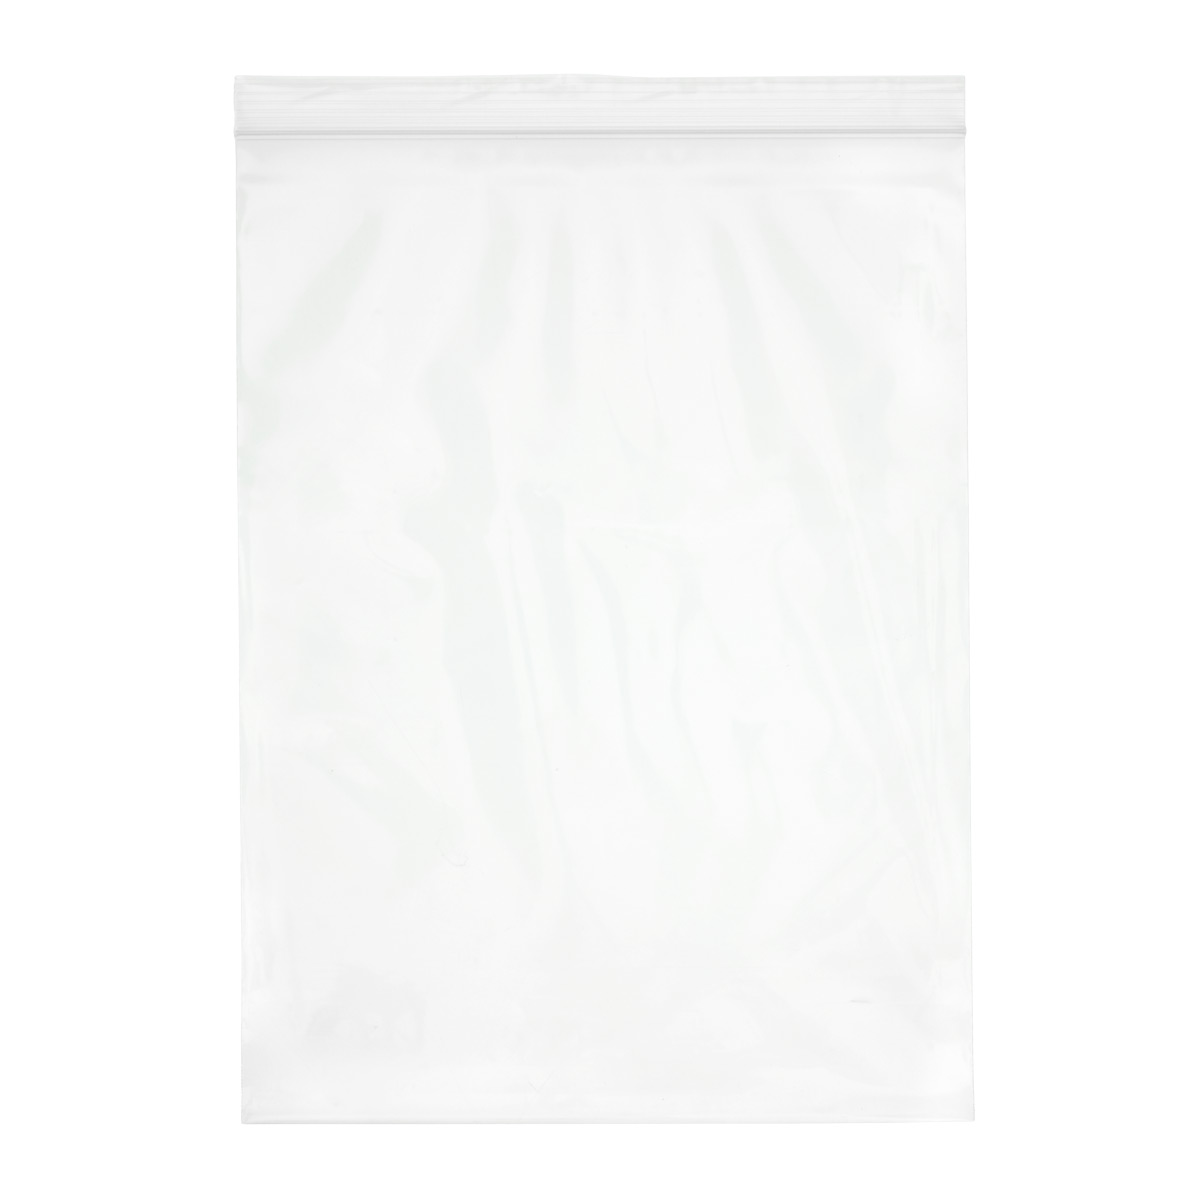 8x10 Clear Reclosable Bags 8" x 10" 4 Mil Heavy Duty Jewelry Storage Bag 1000 